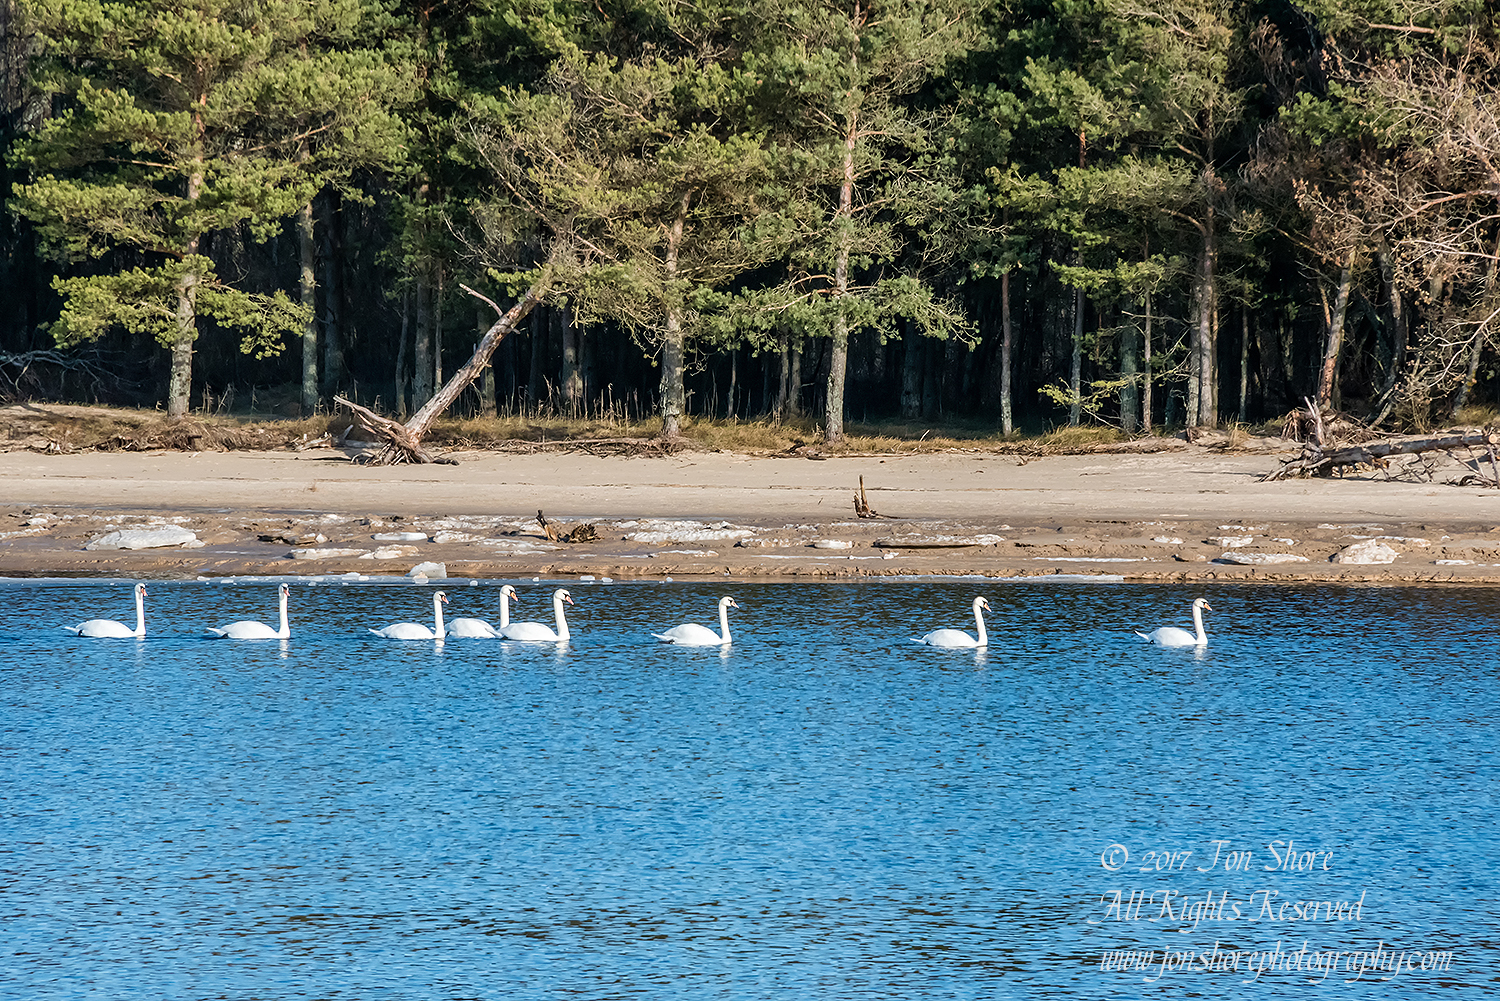 Swans on the Lielupe River in Winter. Nikkor 300mm